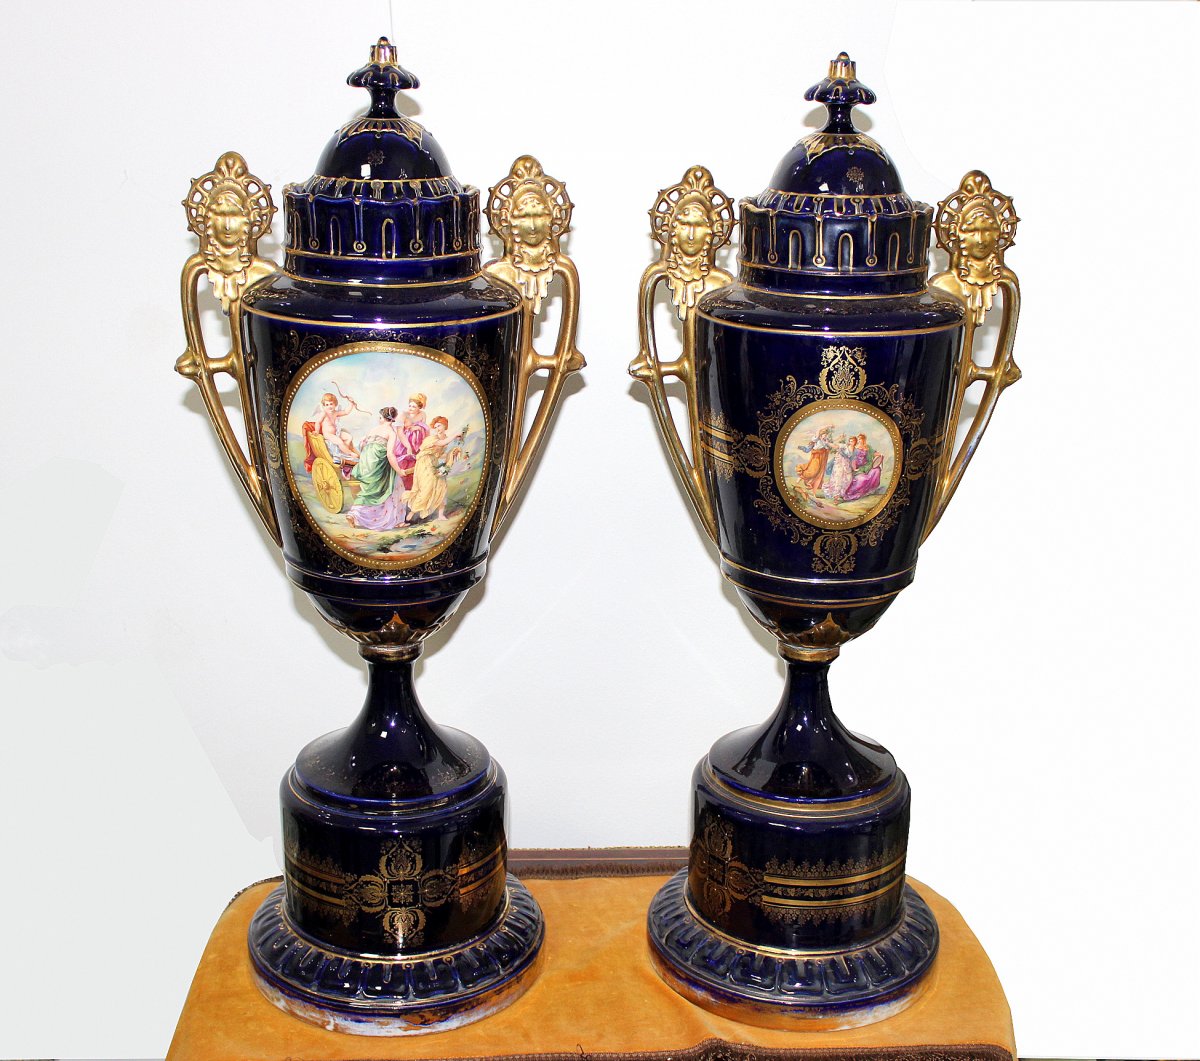 Royal Vienna Style A Pair Of Monumental Porcelain Vases. Germany Around 1880. Height: 76cm